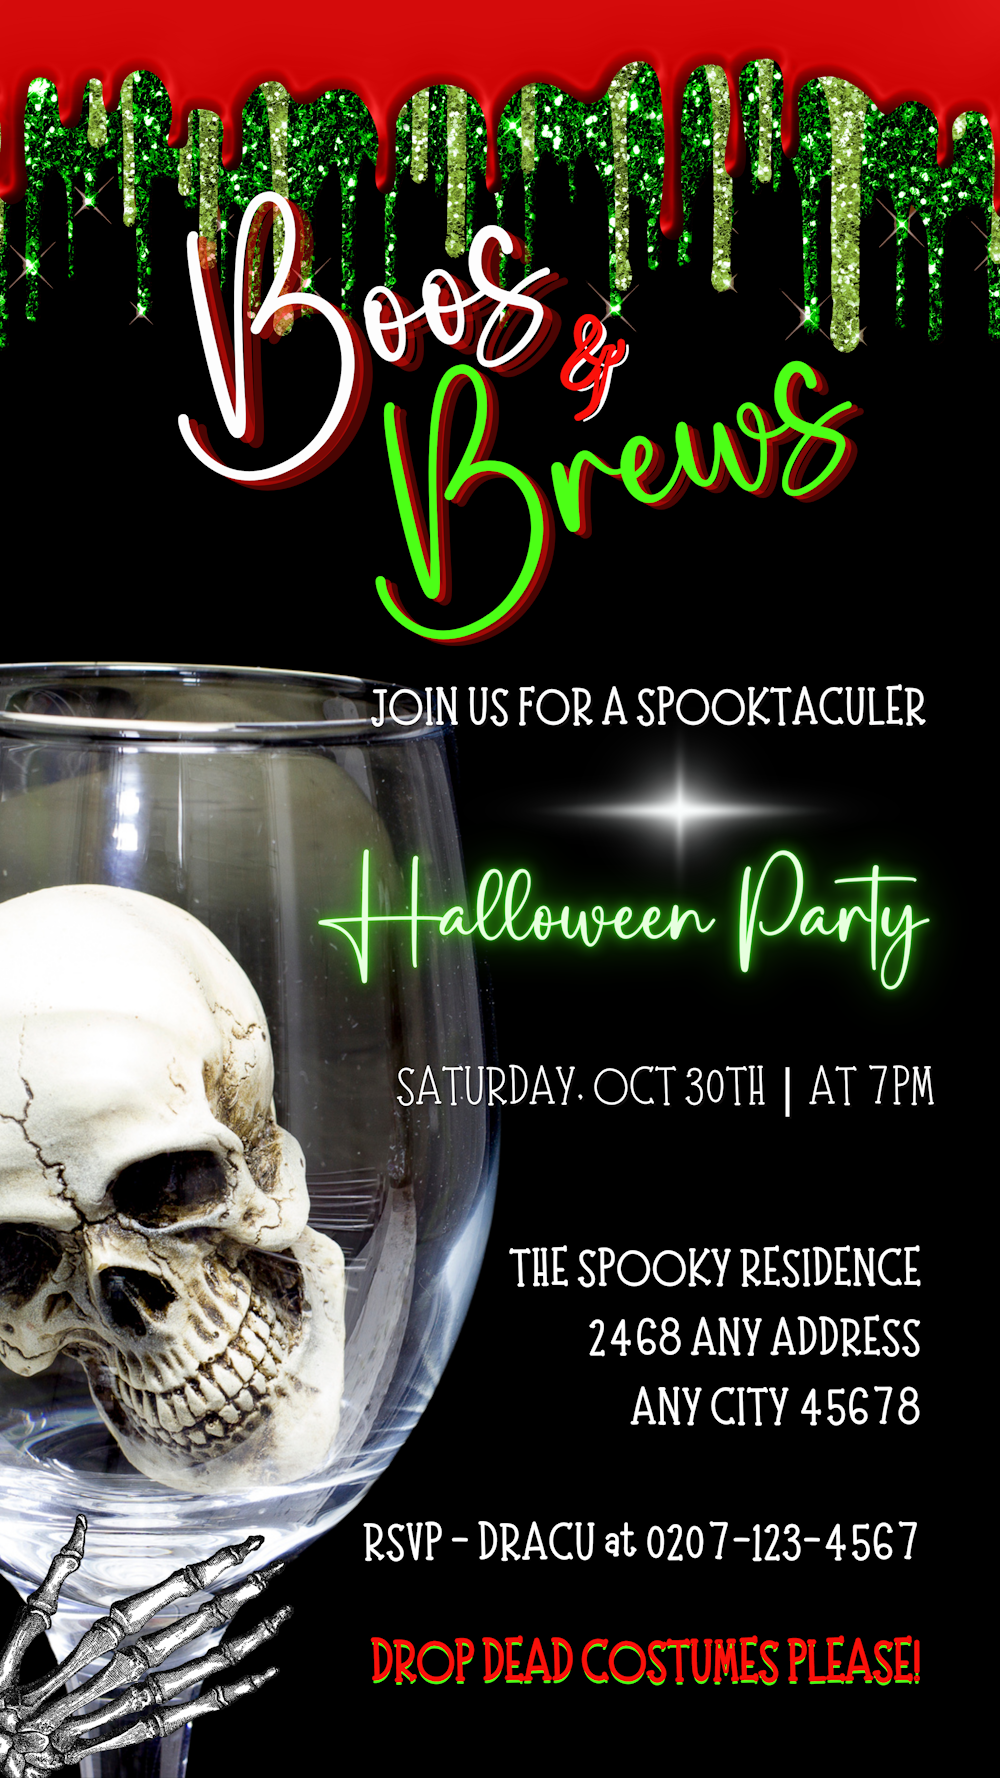 Boos & Brews Glass Skull | Halloween Evite: A skull inside a wine glass, part of a customizable digital invitation template for Halloween events.